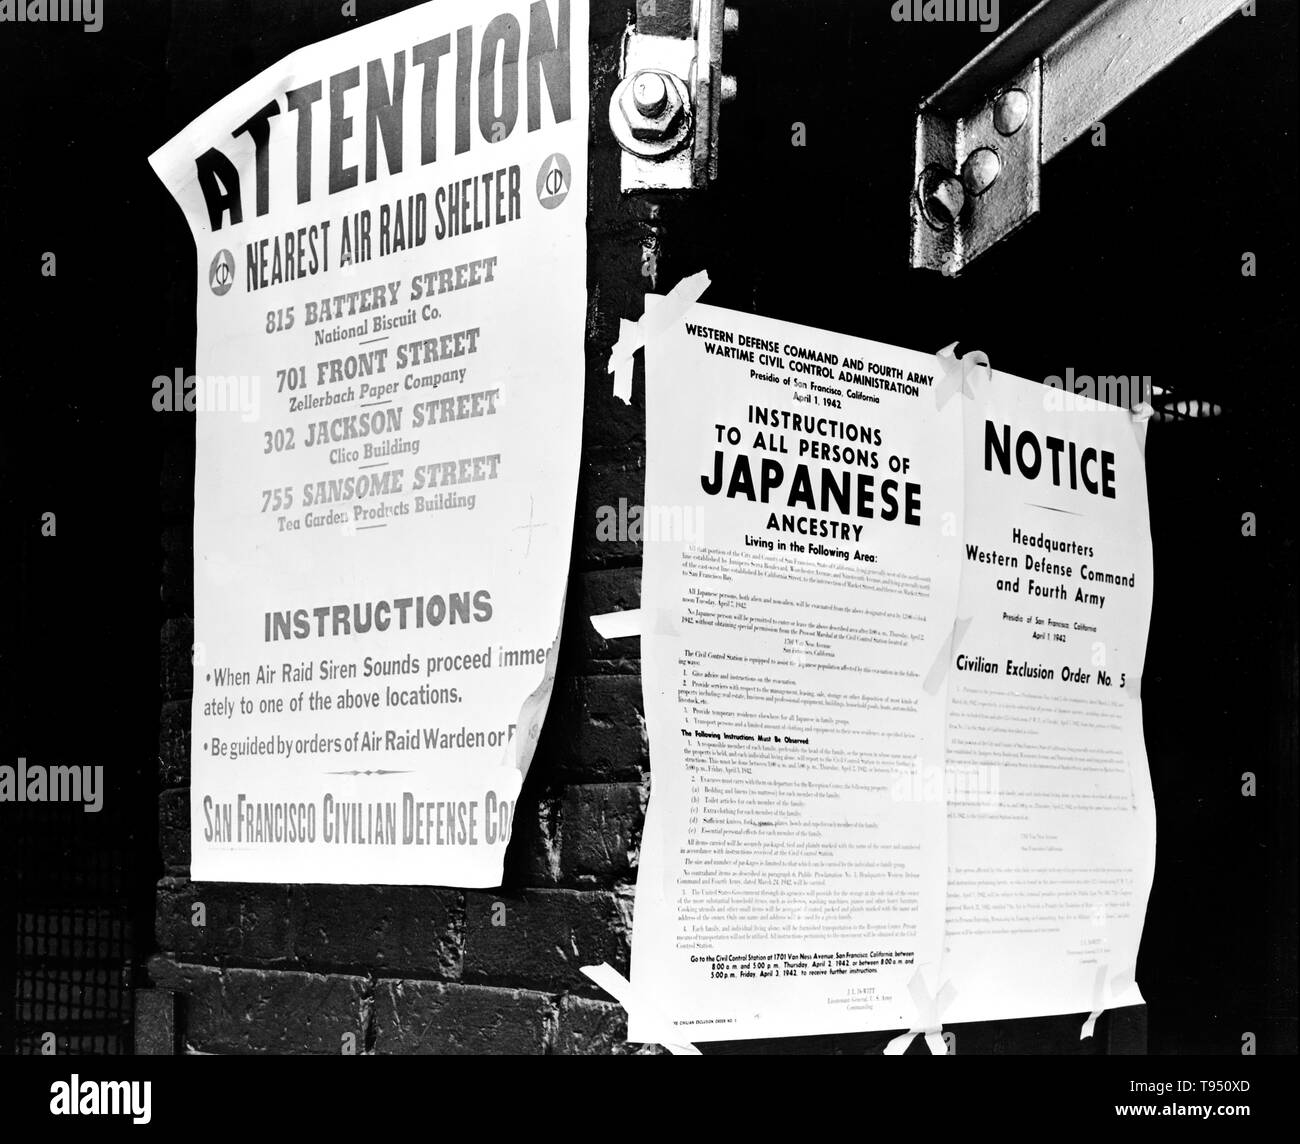 Entitled: 'Civilian exclusion order #5, posted at First and Front streets, directing removal by April 7 of persons of Japanese ancestry, from the first San Francisco section to be affected by evacuation.' The internment of Japanese-Americans during WWII was the forced relocation and incarceration in camps of 110,000-120,000 people of Japanese ancestry (62% of the internees were US citizens) ordered by President Roosevelt shortly after Japan's attack on Pearl Harbor. Stock Photo